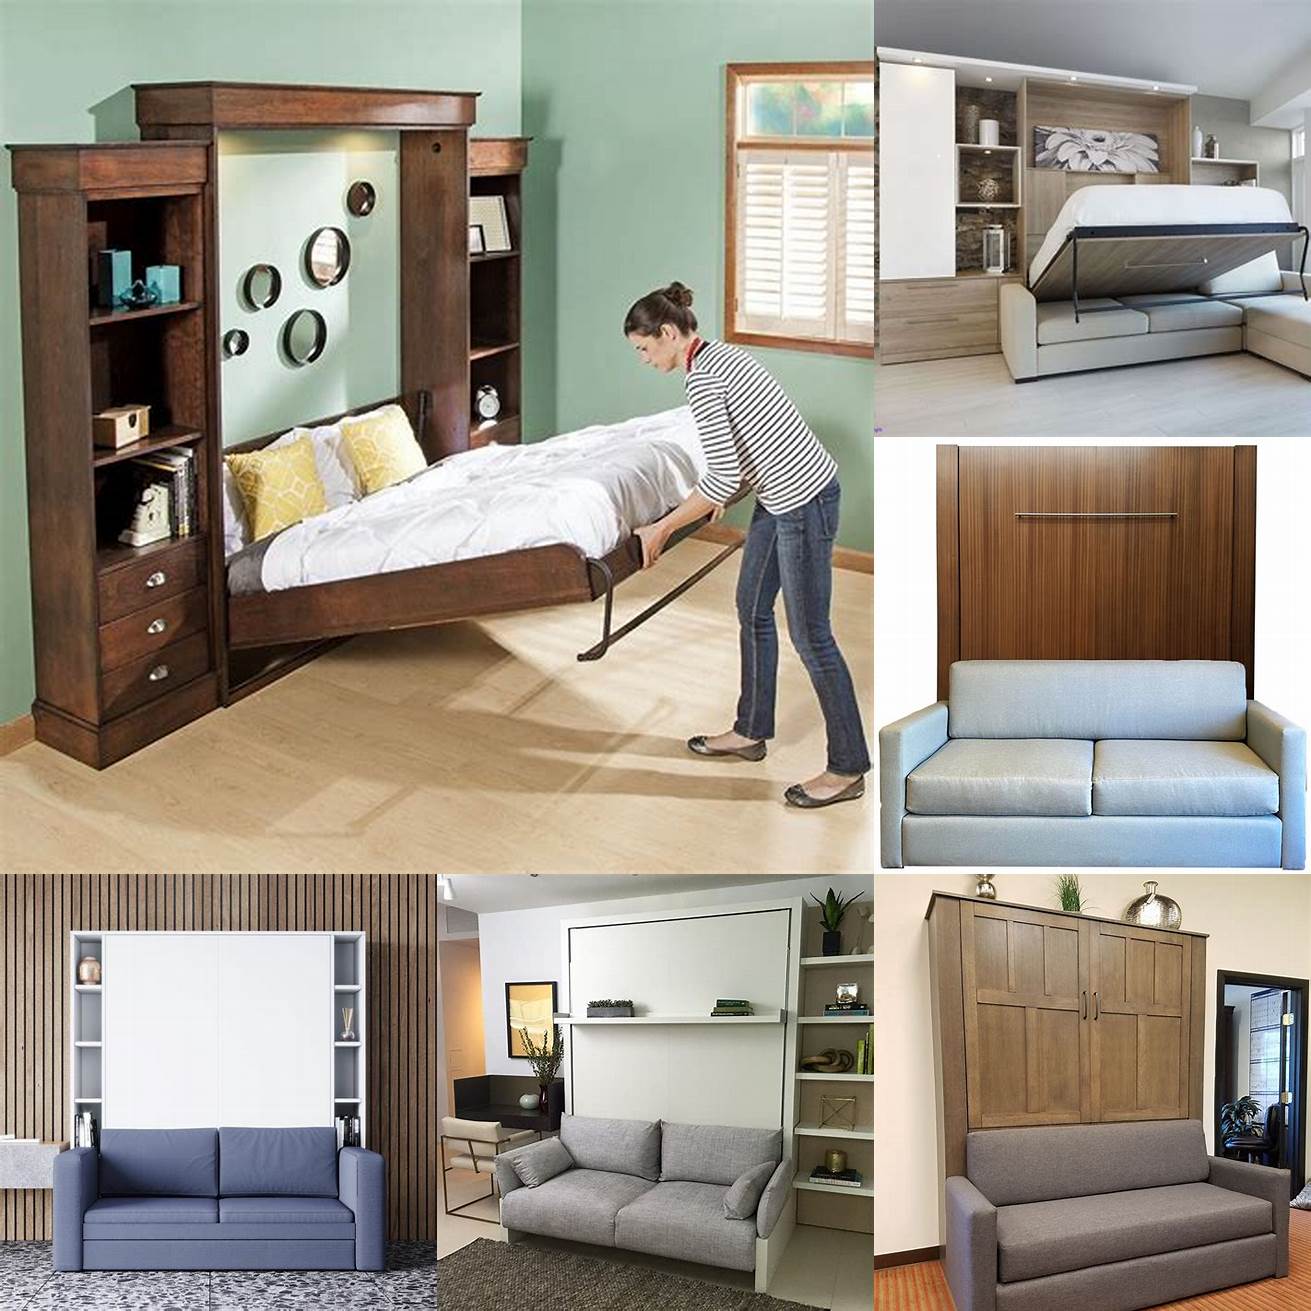 A Queen Size Murphy Bed with a built-in sofa